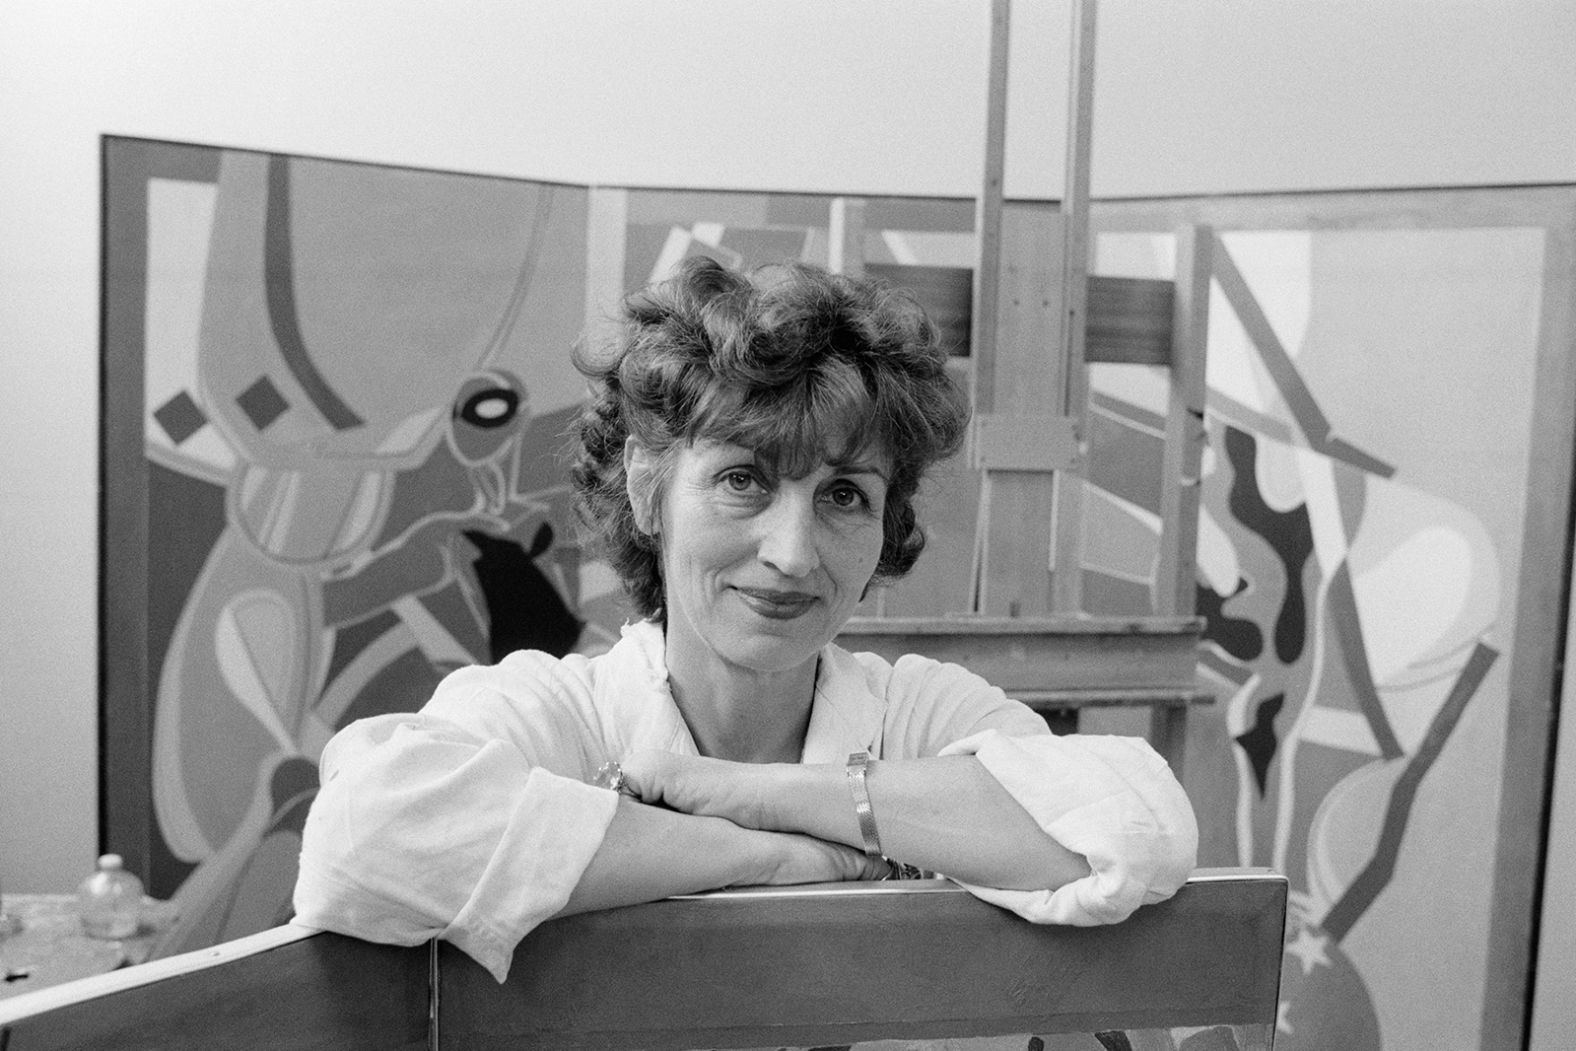 <a href="https://www.cnn.com/2023/06/08/style/francoise-gilot-artist-dies/" target="_blank">Françoise Gilot</a>, a tireless artist who defied simple categorization — and efforts to define her merely as a footnote in the story of her former lover Pablo Picasso — died on June 6. She was 101.